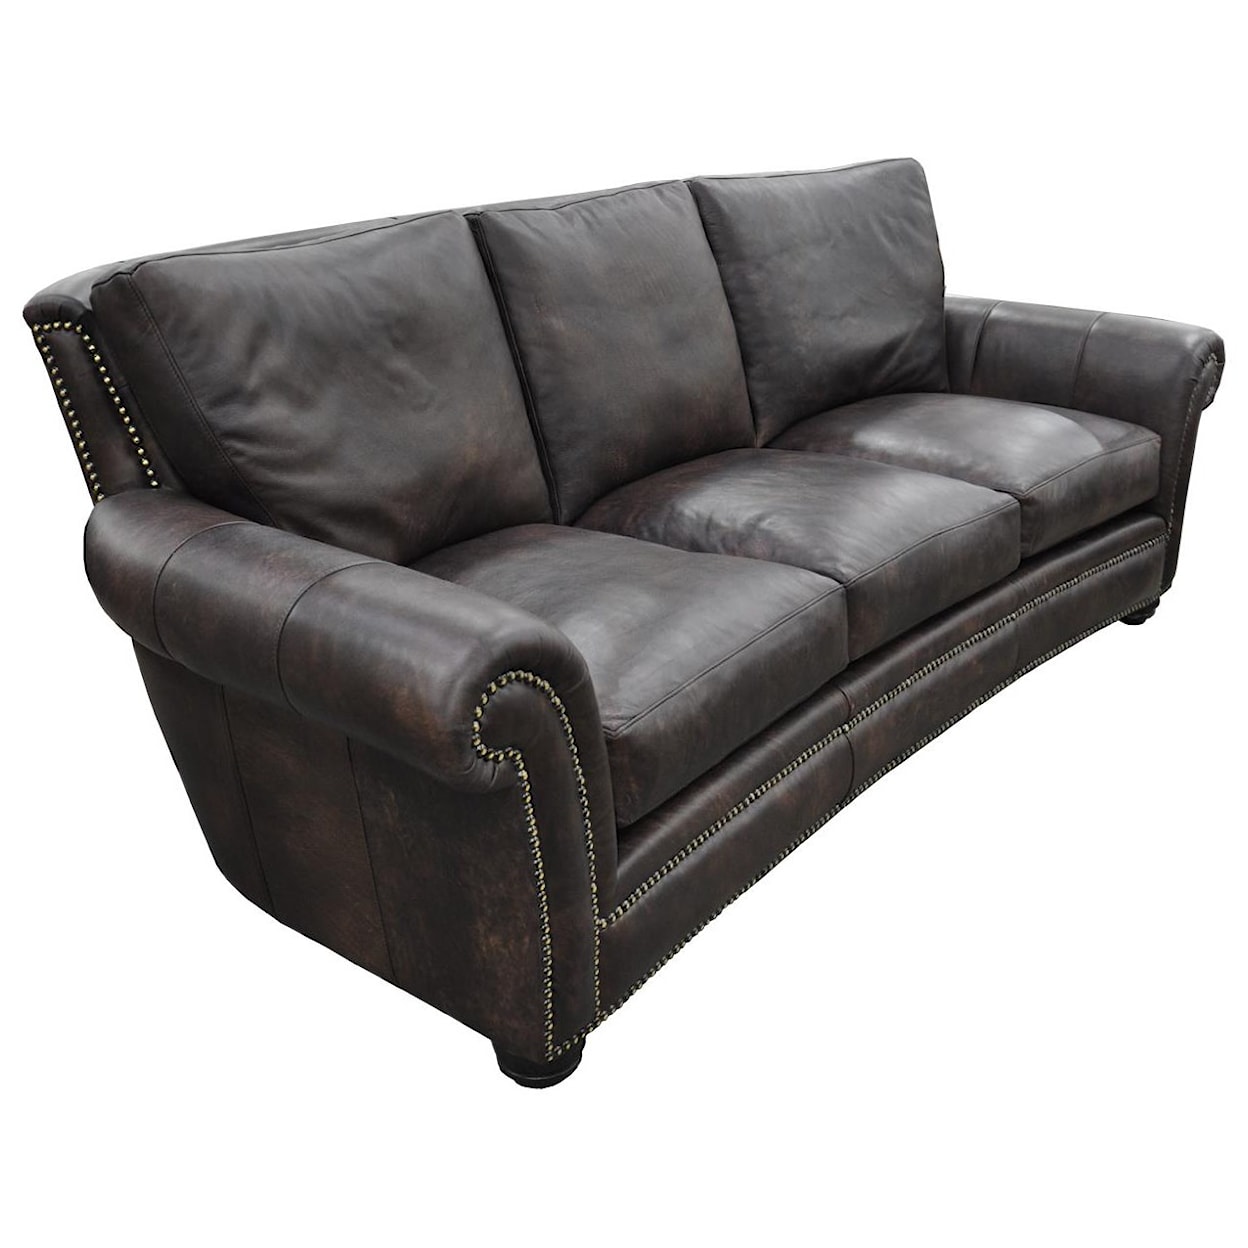 Omnia Leather Kaymus Rolled Arm Leather Sofa